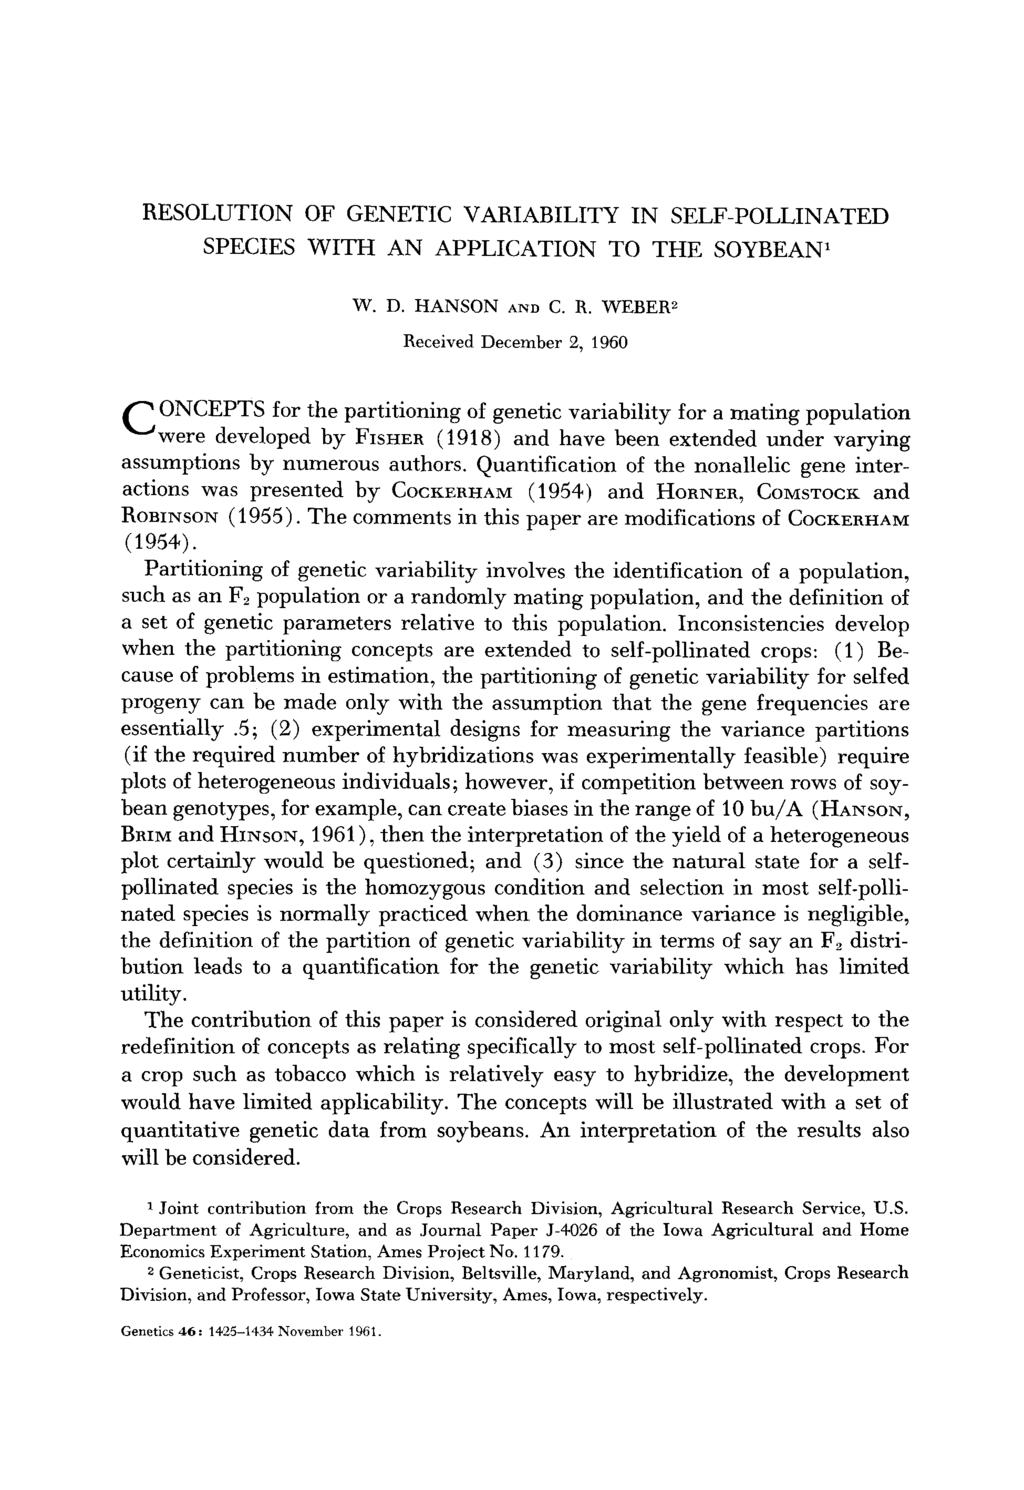 RESOLUTION OF GENETIC VARIABILITY IN SELF-POLLINATED SPECIES WITH AN APPLICATION TO THE SOYBEAN' W. D. HANSON AND C. R.